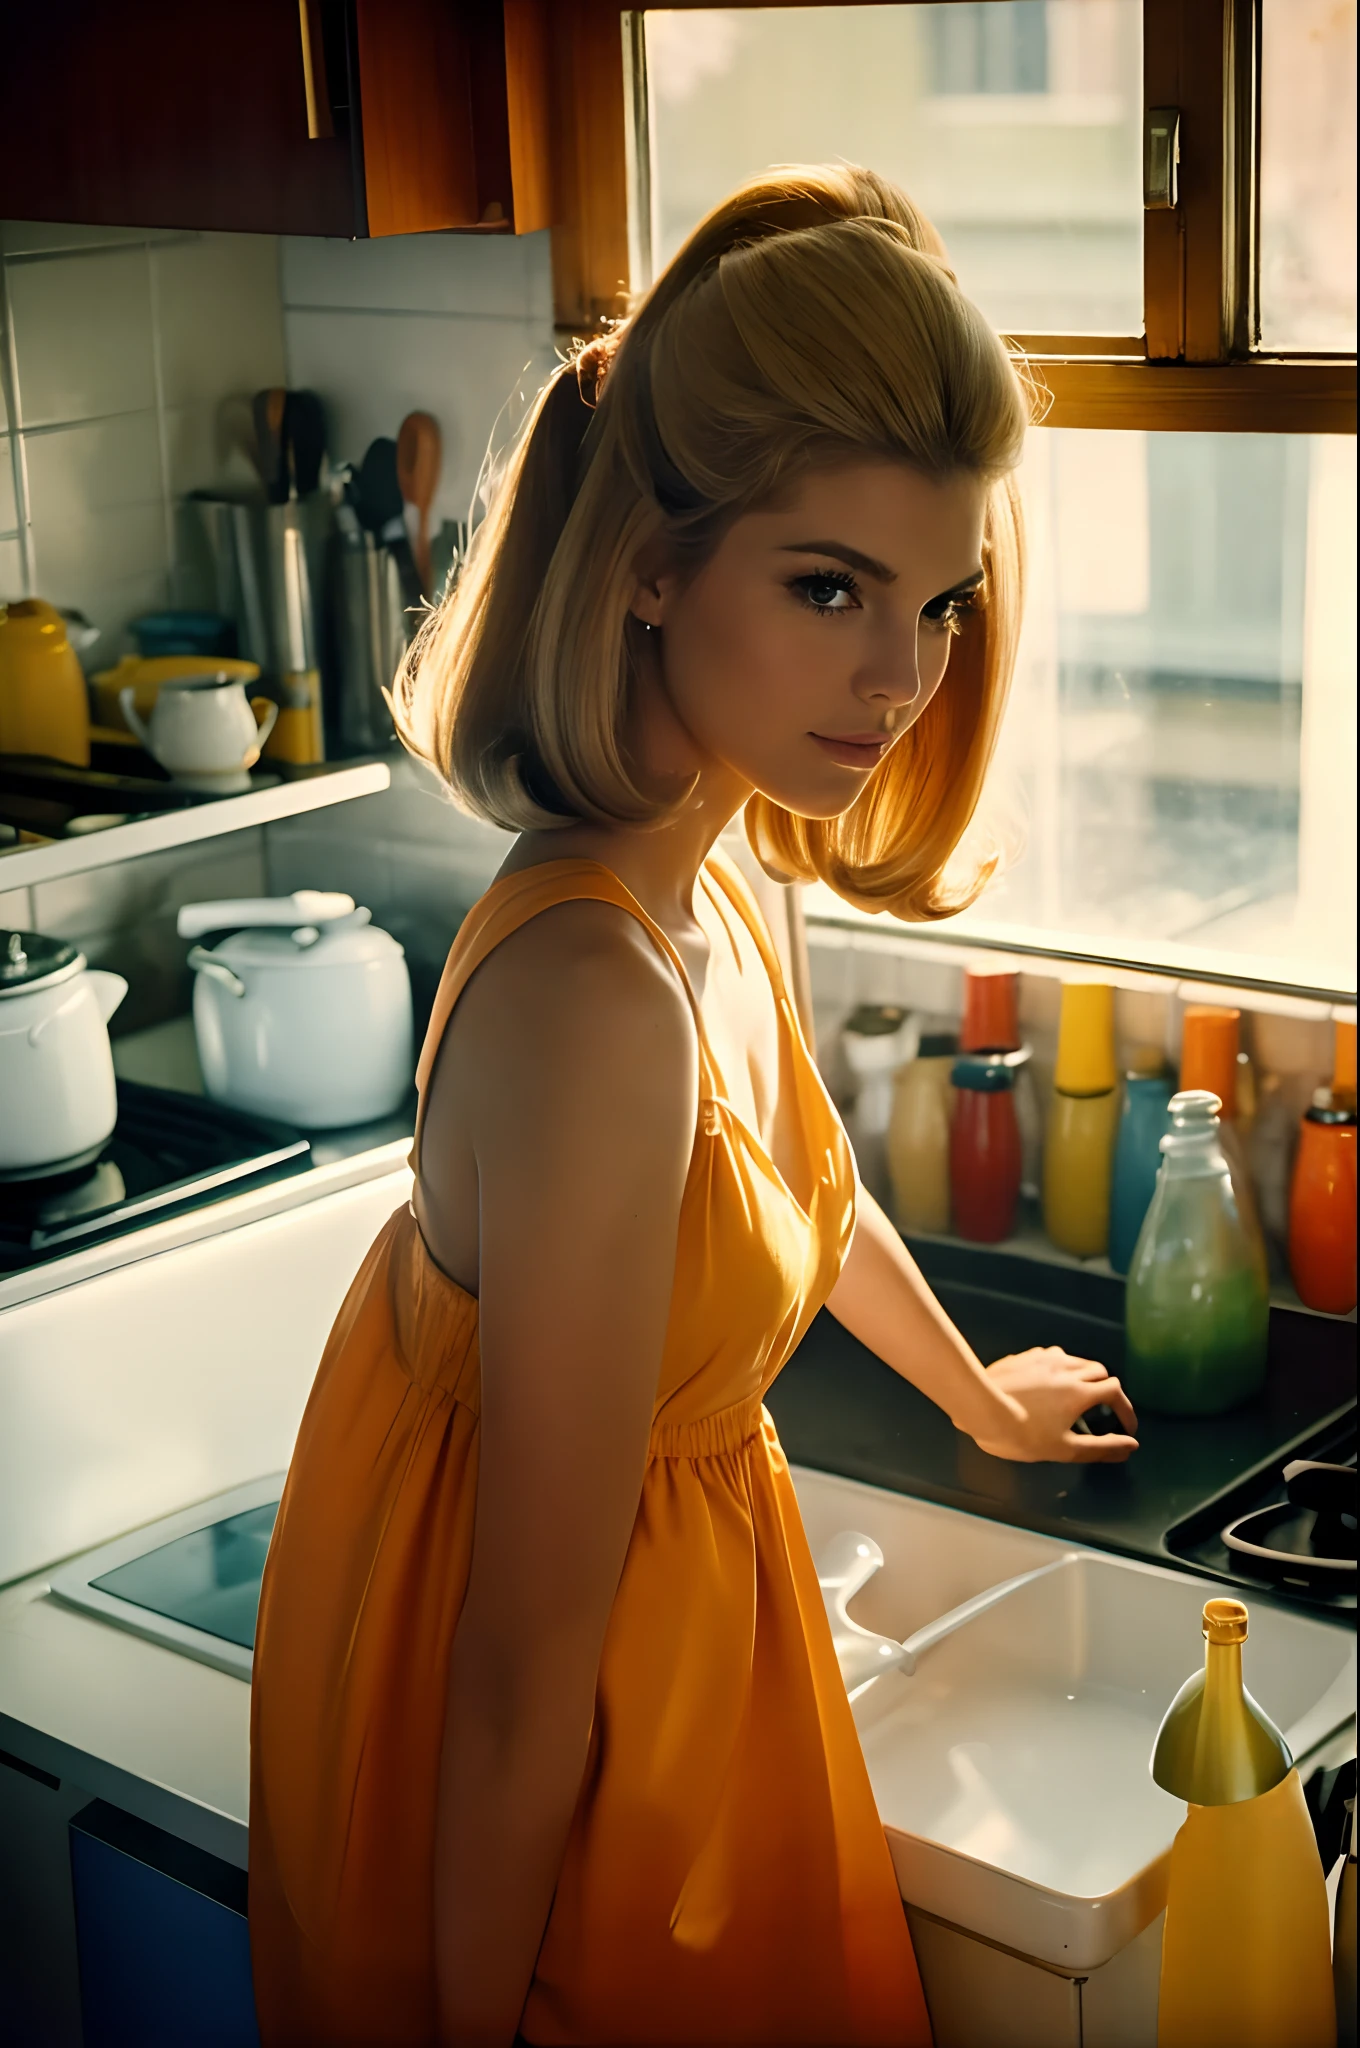 Low angle shot, an athletic honey blonde, wearing a vintage 1960s dress, SixtiesHighFashion, 1960s hairstyle, medium breasts, not exposed, in kitchen, food pots on a stove in a sunny ((1960s kitchen)), looking away from viewer, beautiful view out the windows, 8 k sensual lighting, warm lighting, 4k extremely photorealistic, cgsociety uhd 4k highly detailed, trending on cgstation